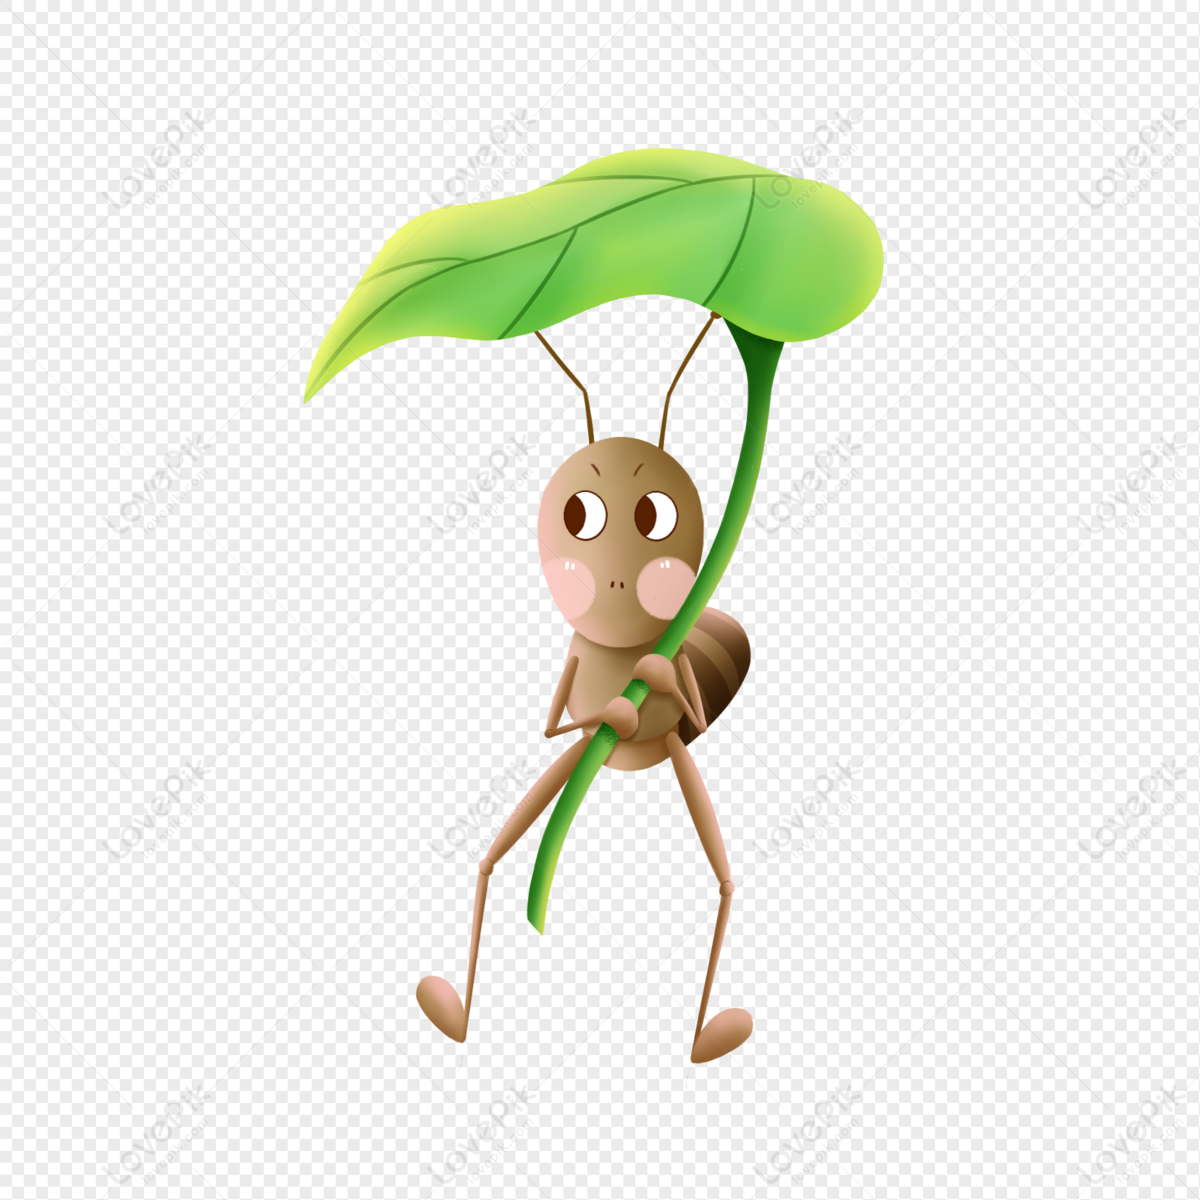 Ants With Leaves Free PNG And Clipart Image For Free Download - Lovepik |  401692019